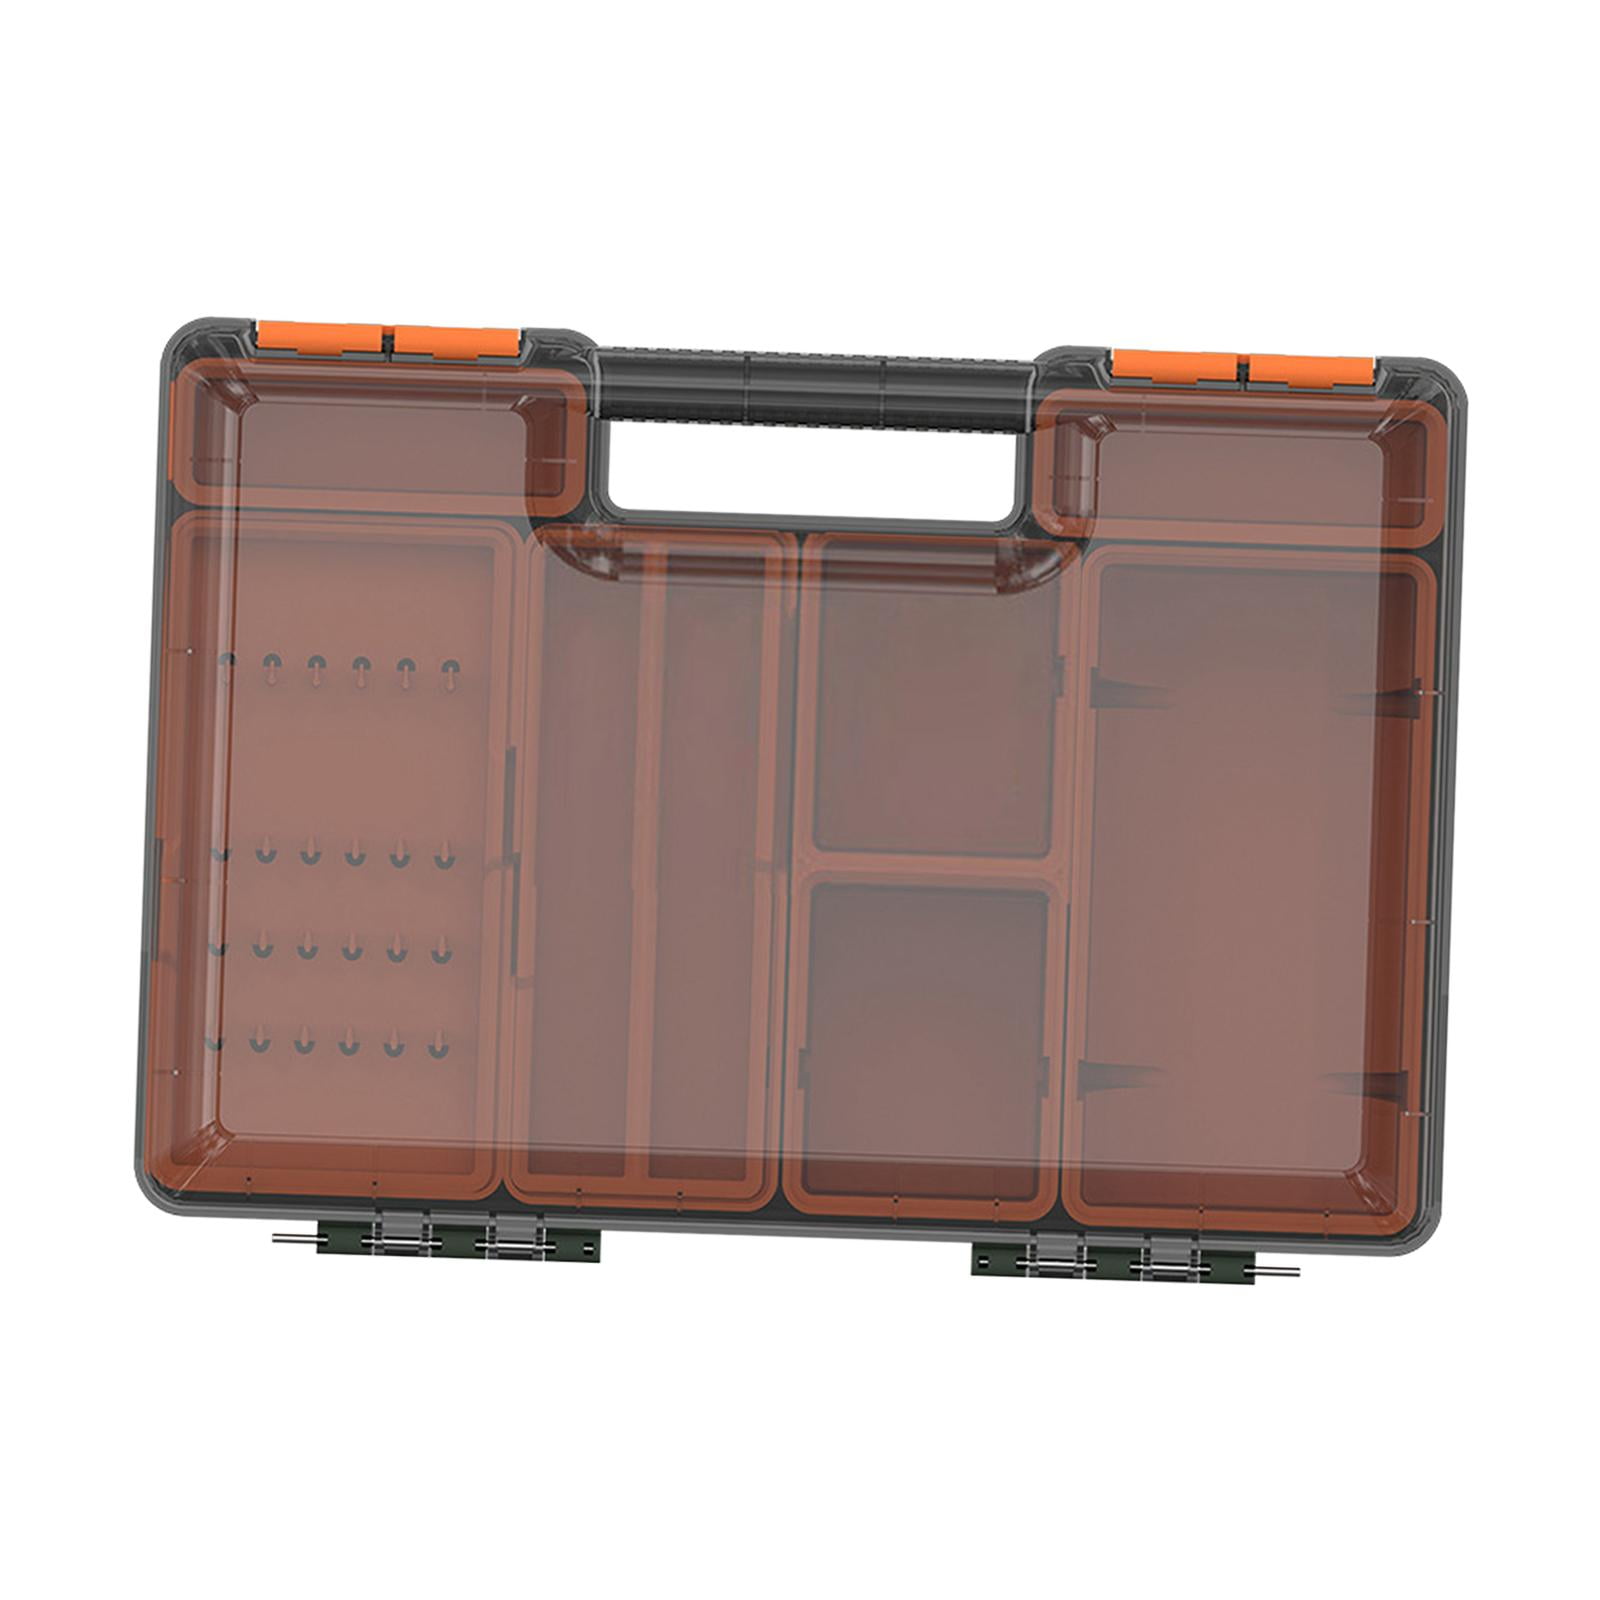 Plano 682007 26 GRAB-N-GO Storage Tool Box with Removable Tray